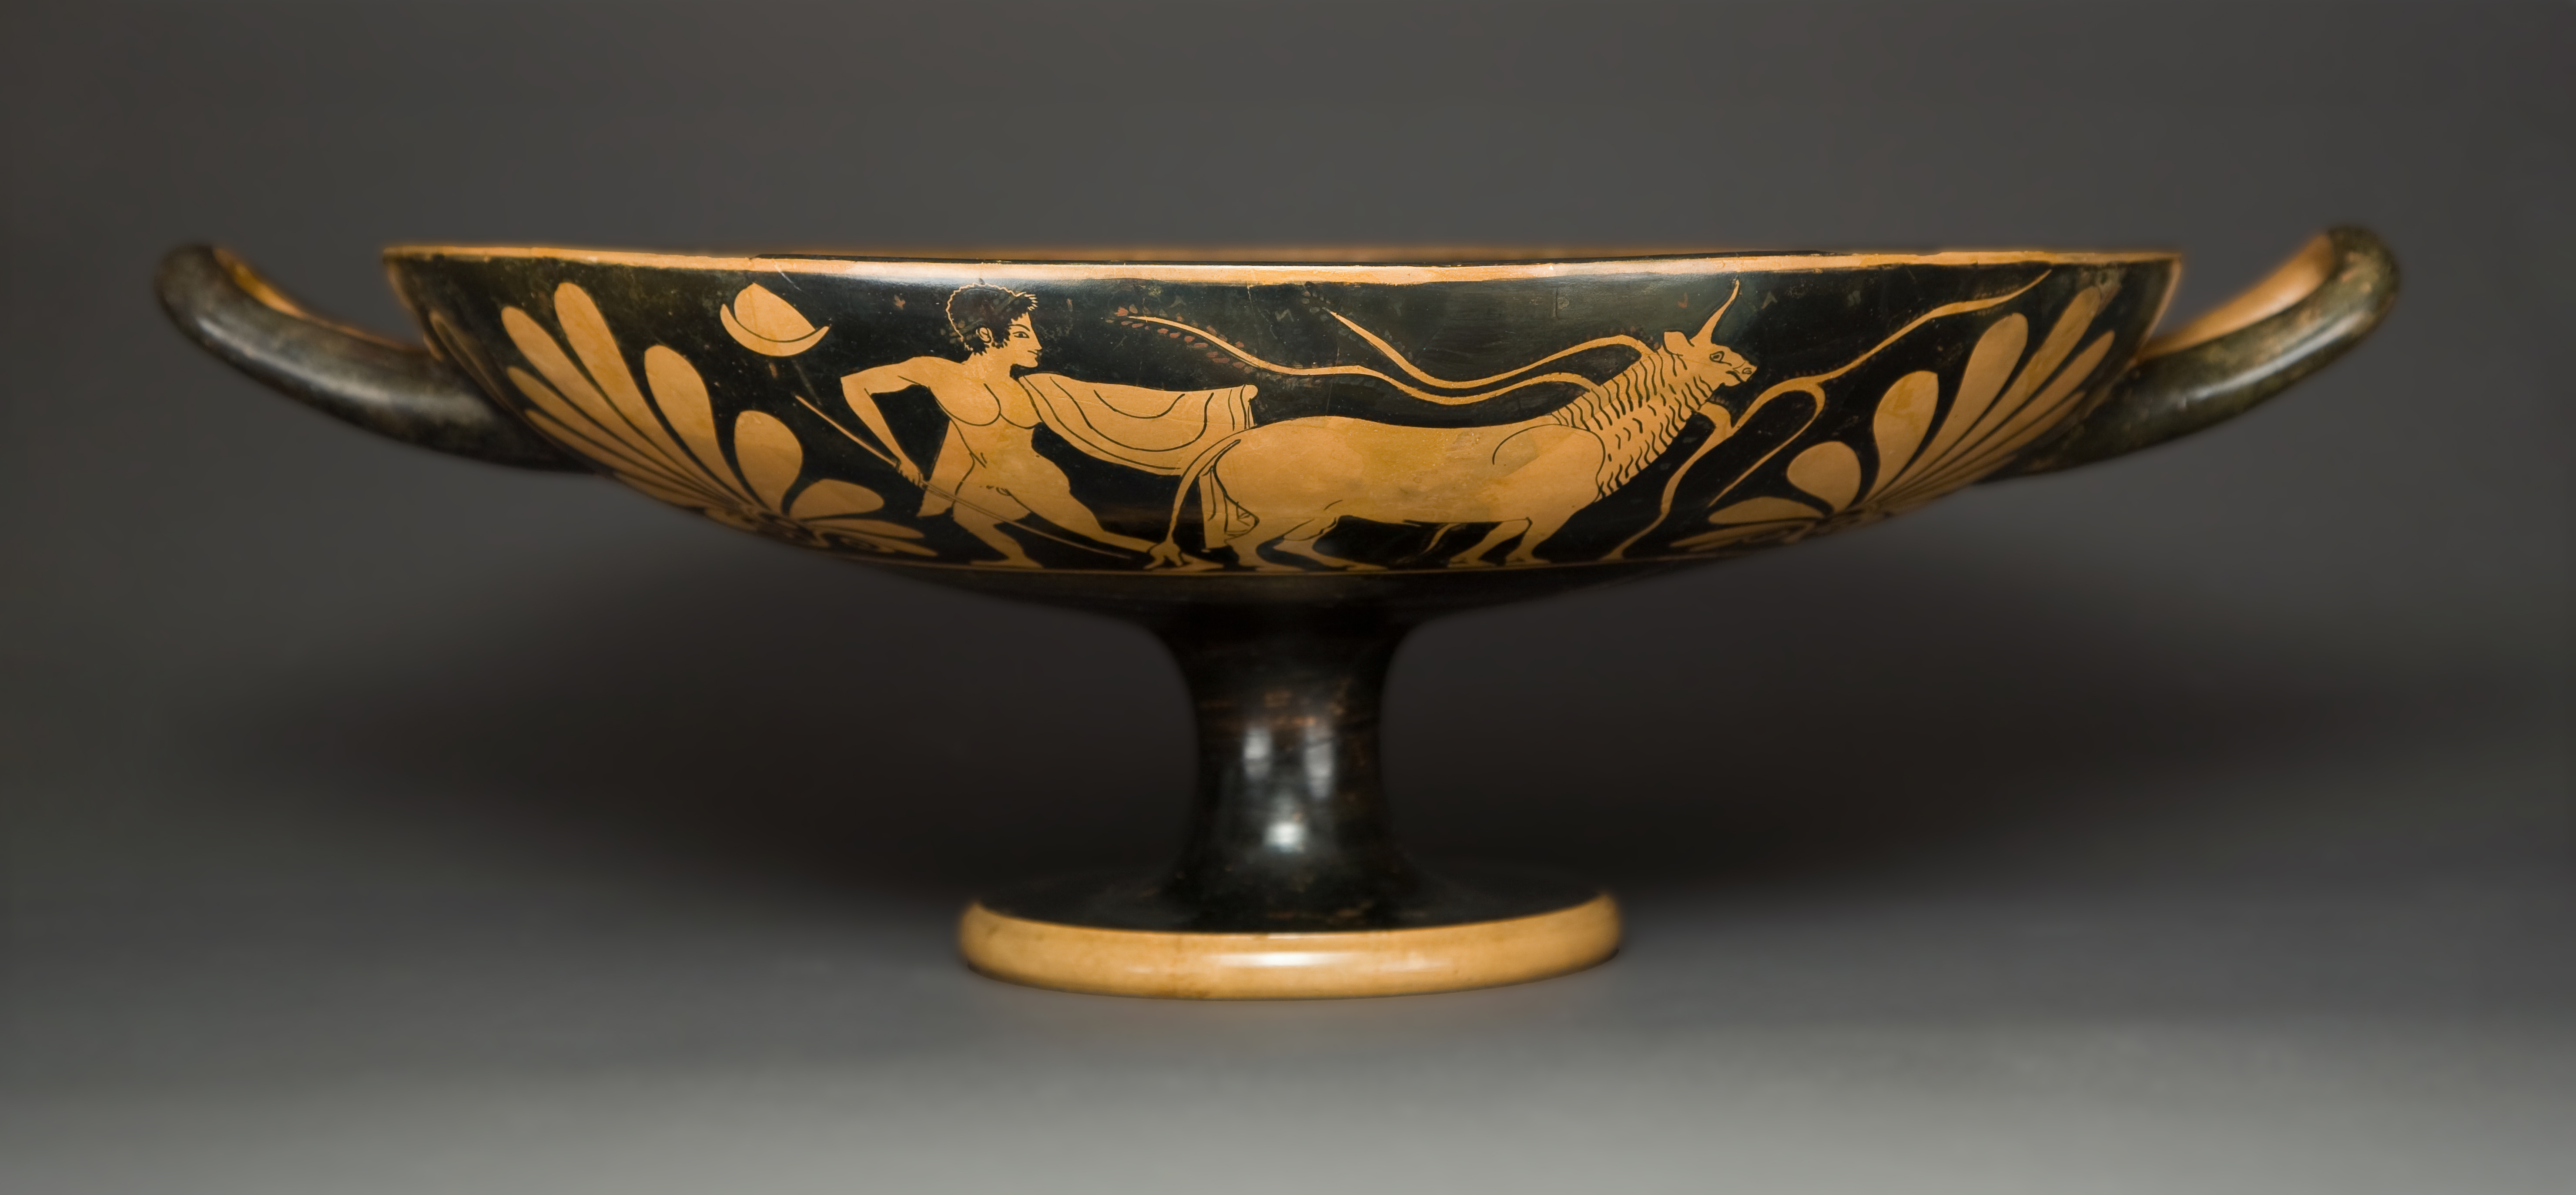 A red-figure ware wine cup (kylix).